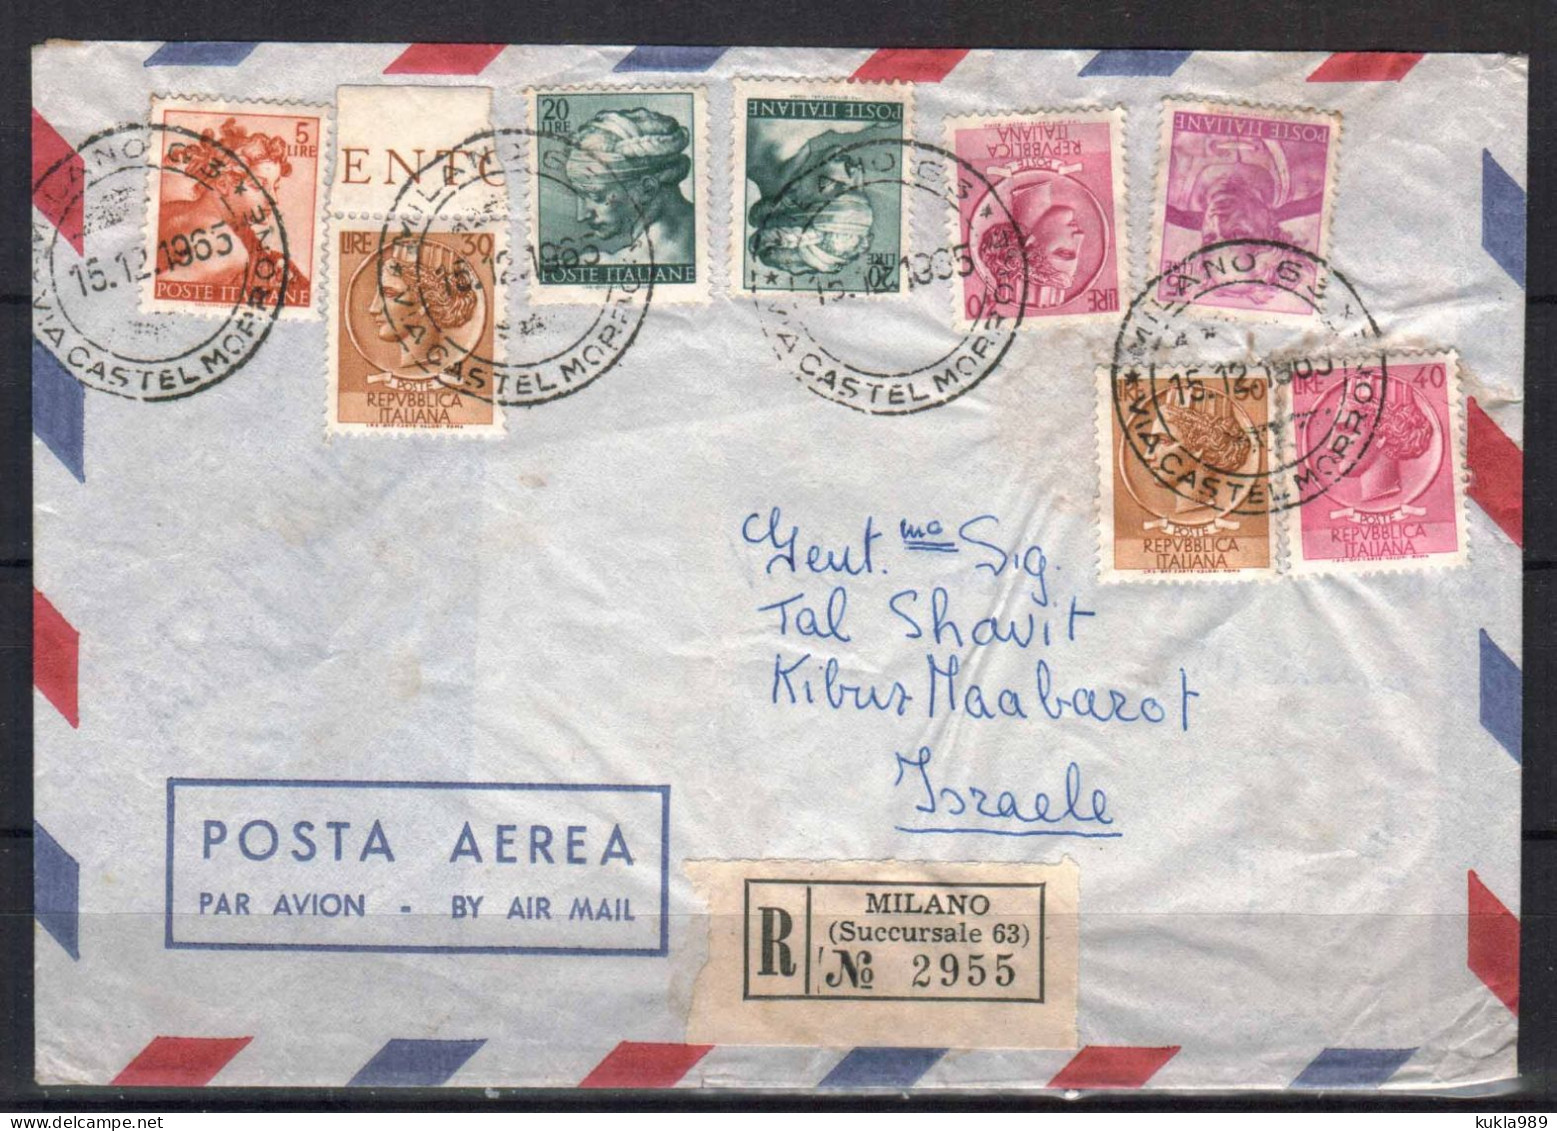 ITALY STAMPS. 1965 REG. COVER TO ISRAEL - Poste Aérienne